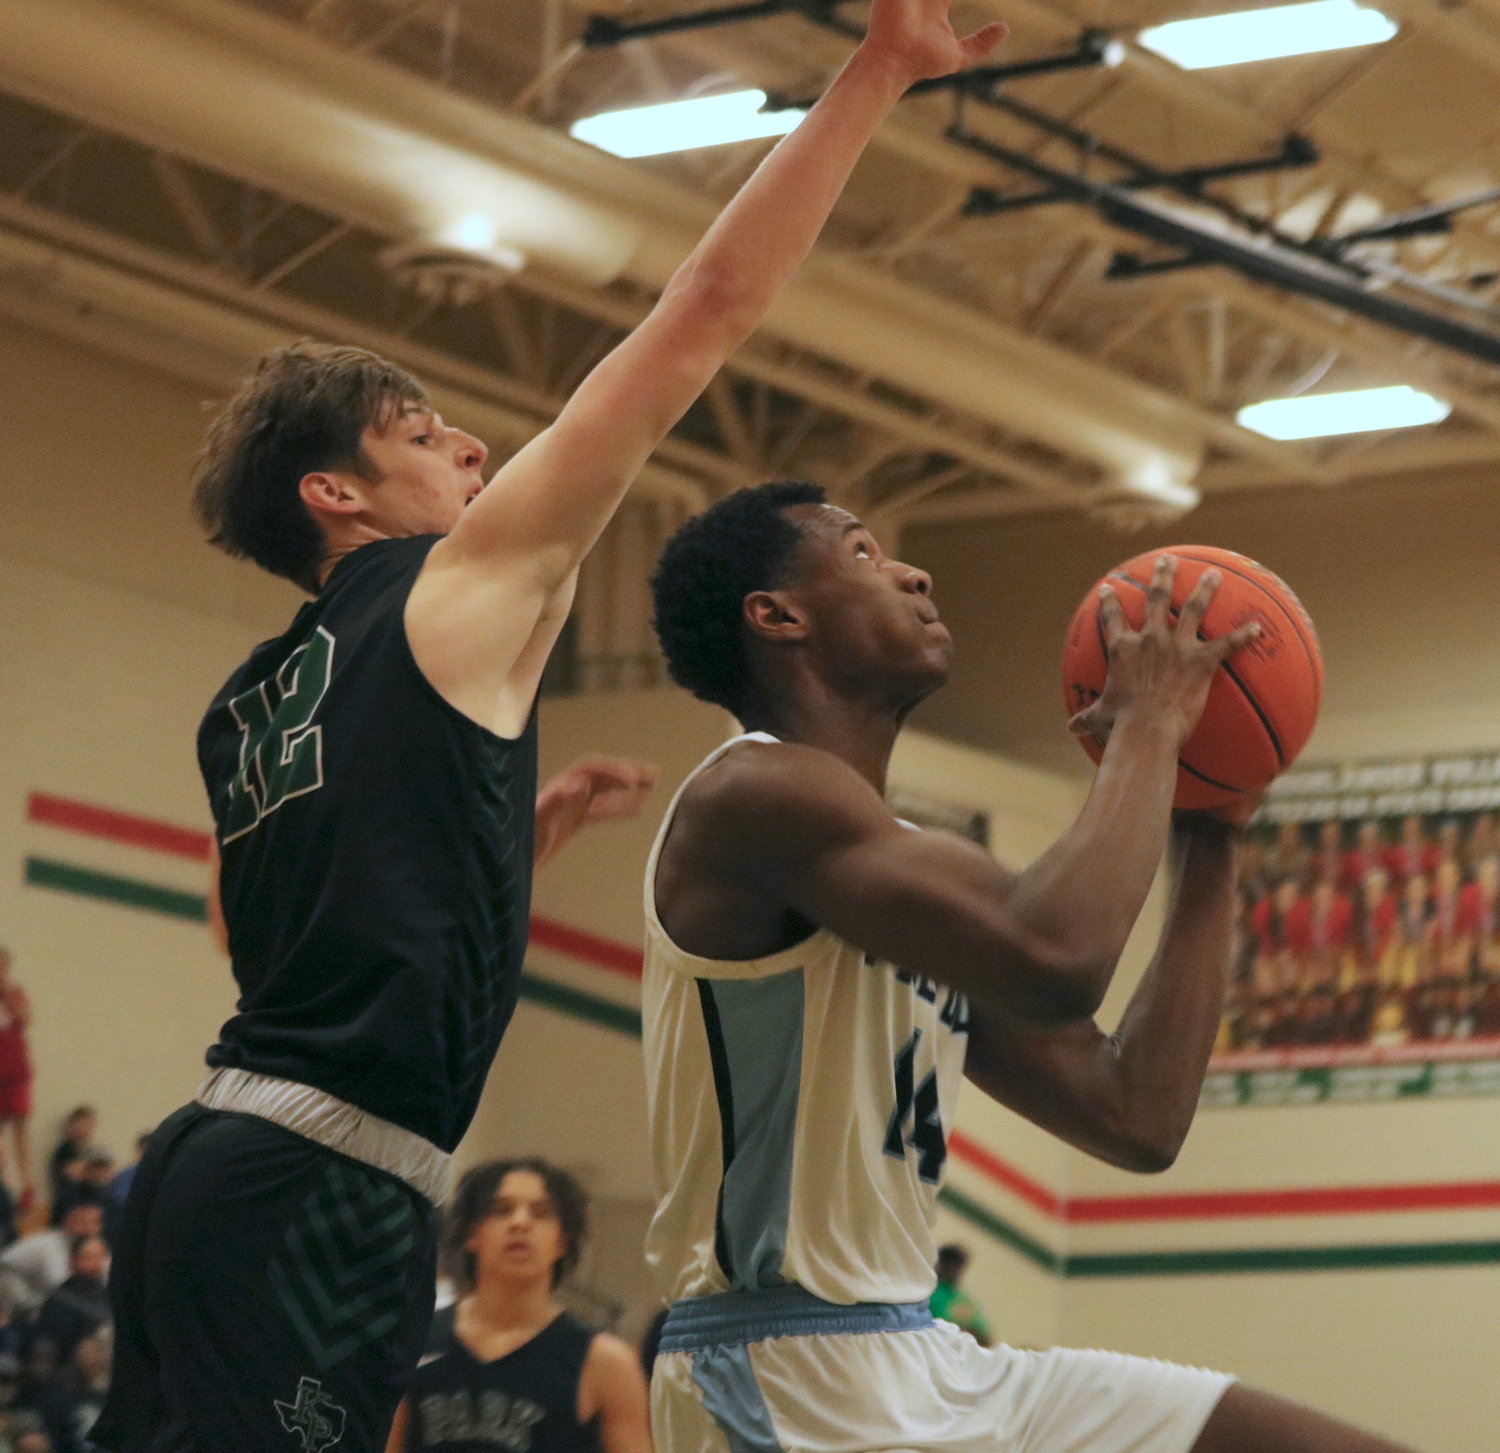 Abou Camara shoots a reverse layup during Monday’s game between Paetow and Kingwood Park at The Woodlands High School.